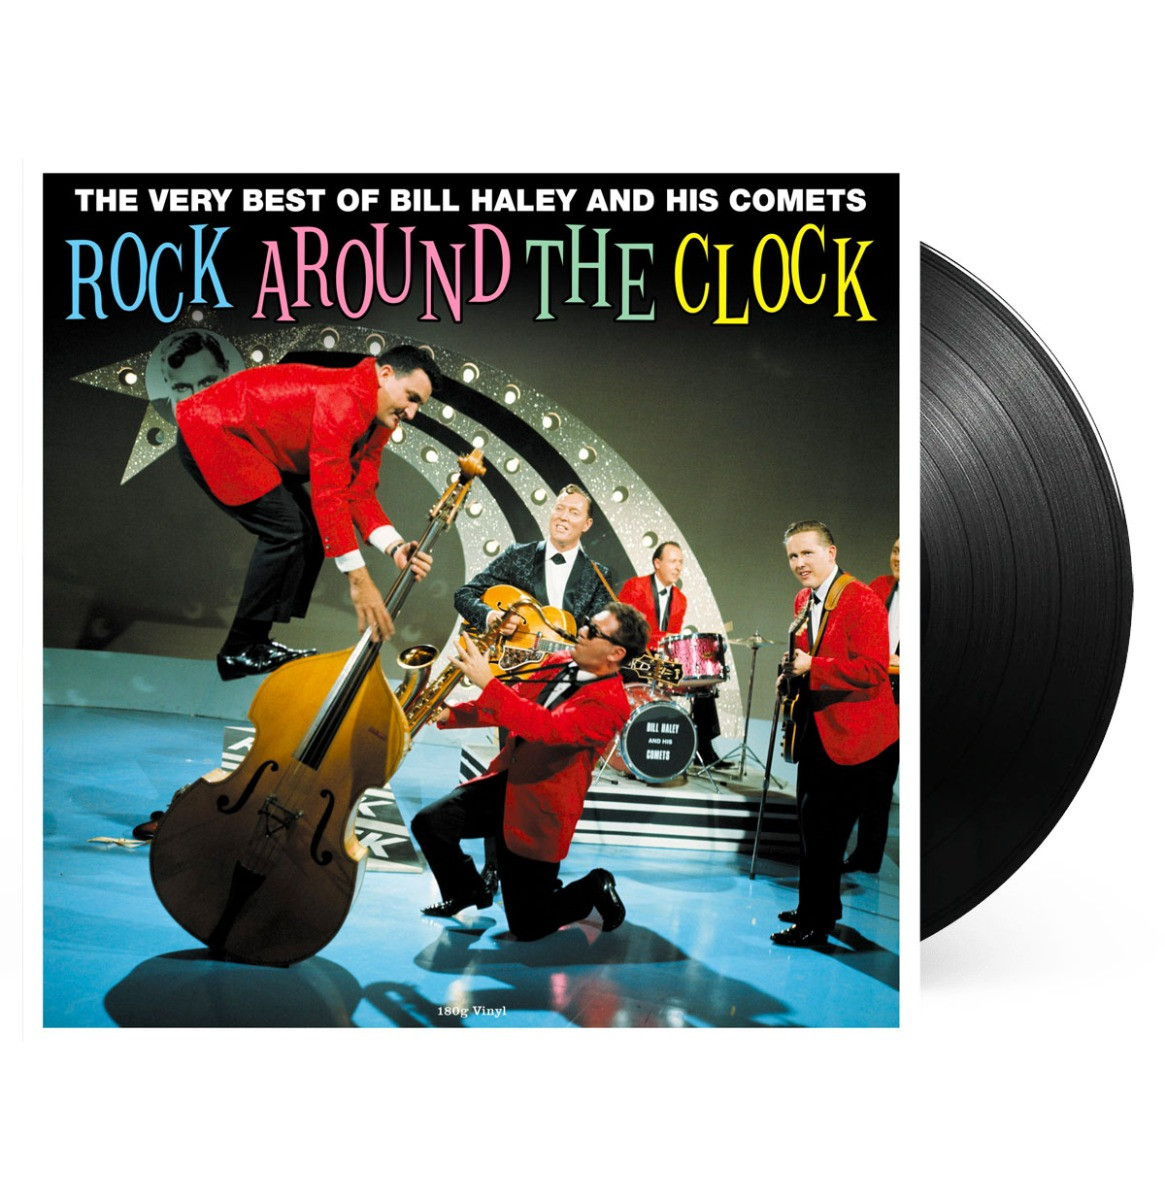 Bill Haley - Rock Around The Clock: The Very Best Of Bill Haley And His Comets LP